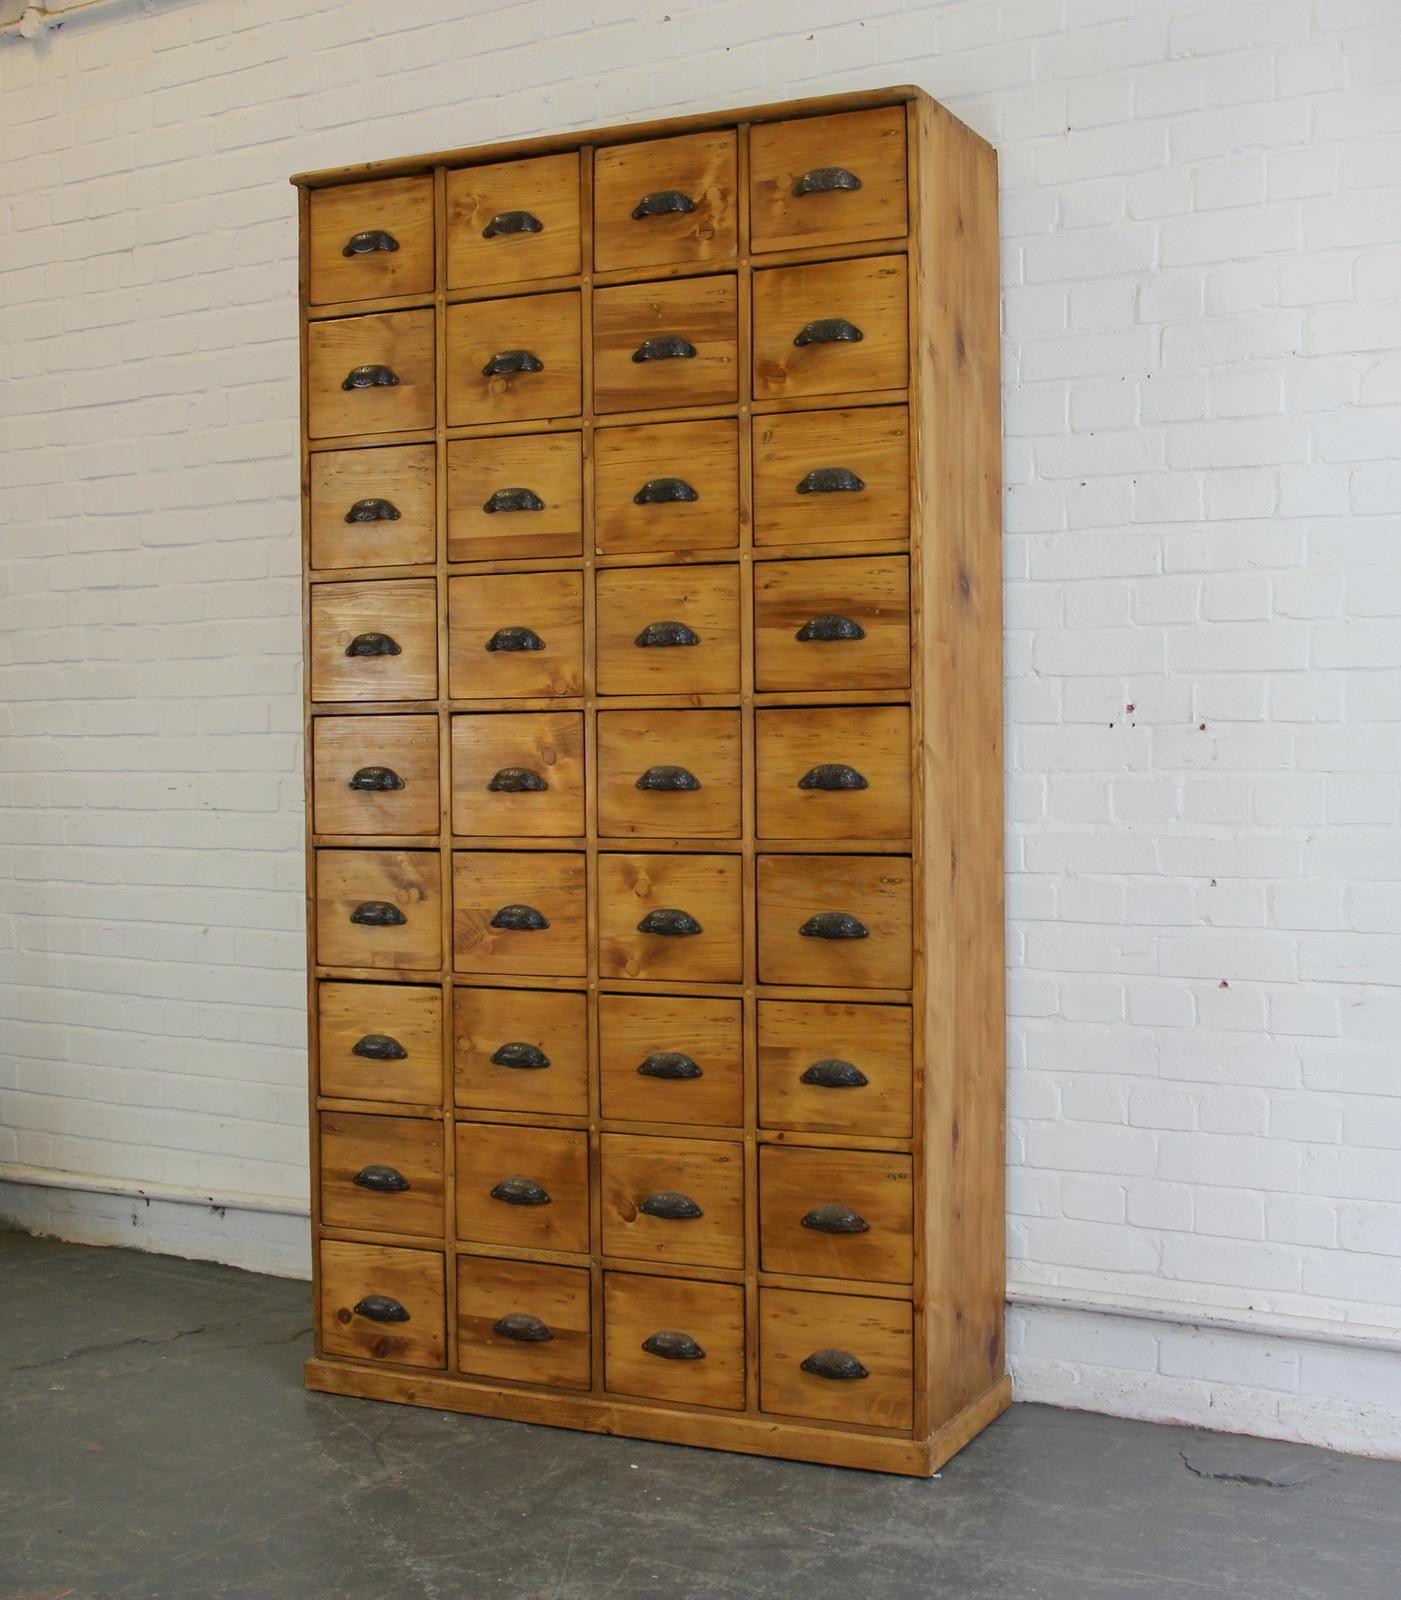 Early 20th century Dutch hardware store drawers

- Ornate cast iron handles
- Solid pine drawers and cabinet
- 36 identical drawers
- Originally used in a hardware store to house nut and bolts
- Dutch, 1910
- Measures: 110cm wide x 41cm deep